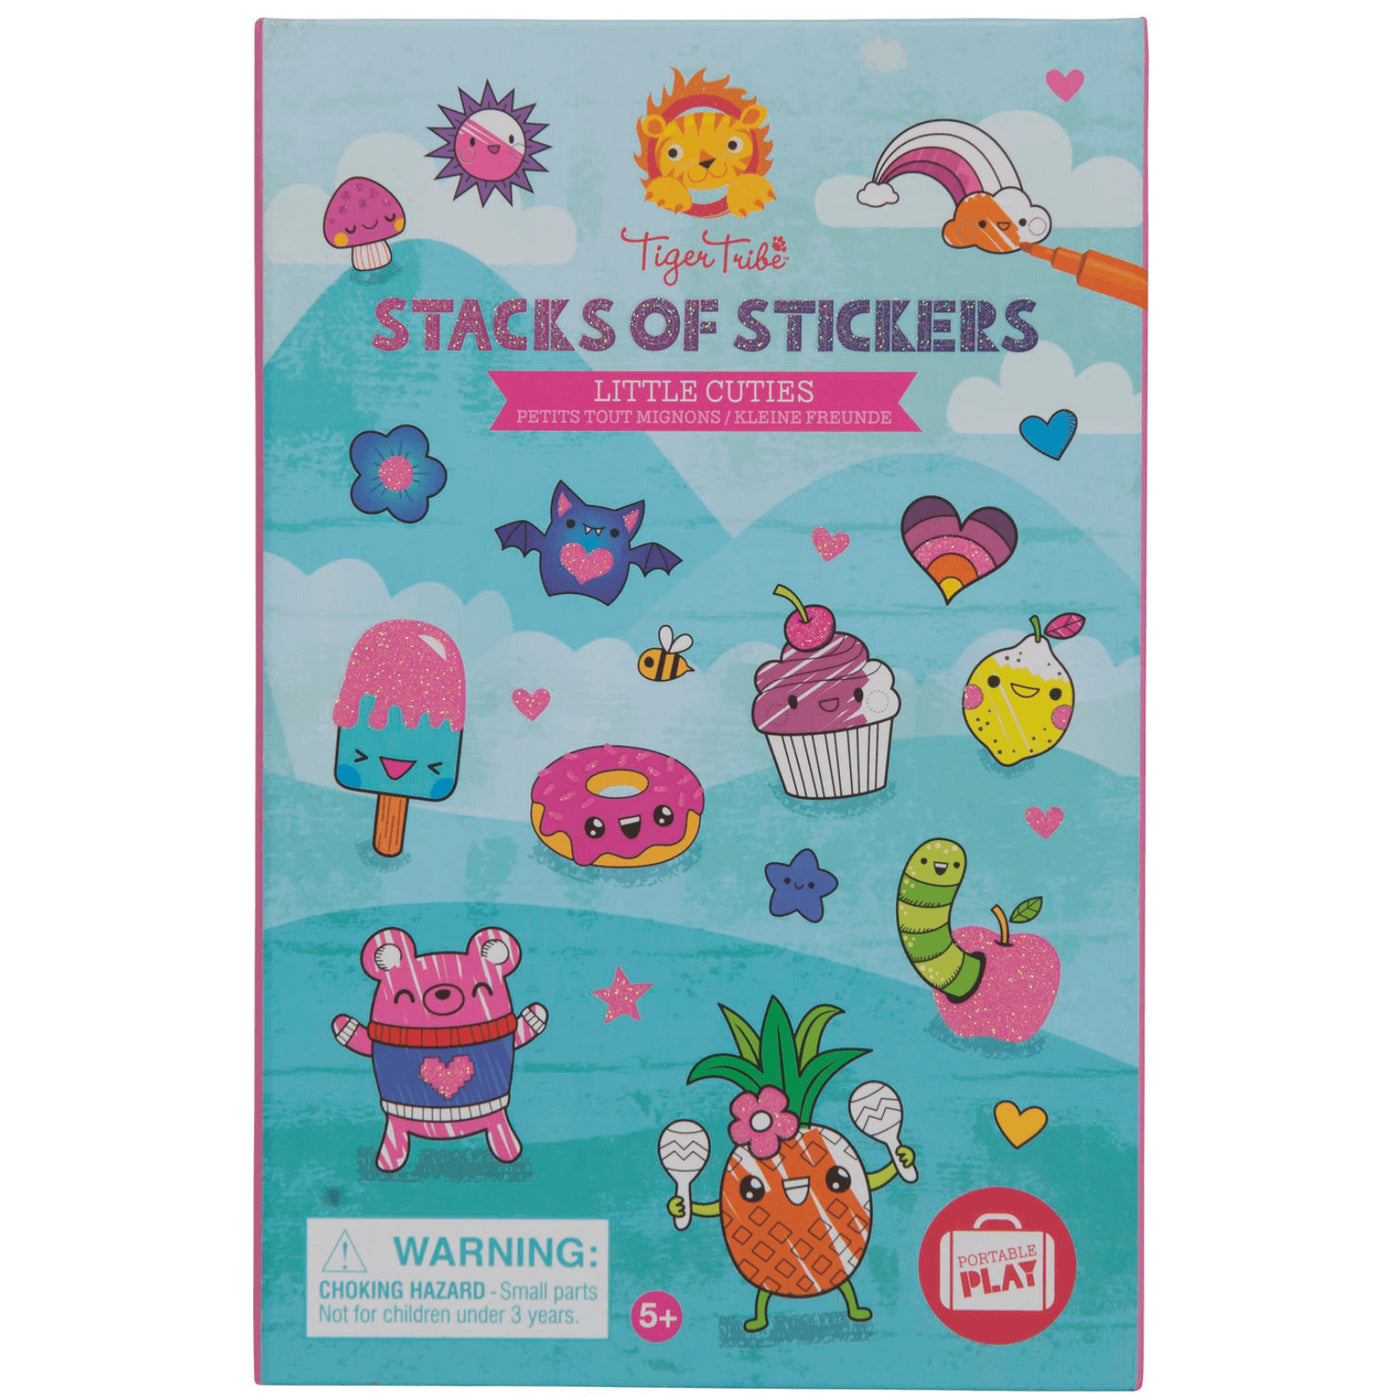 Stacks of Stickers - Little Cuties